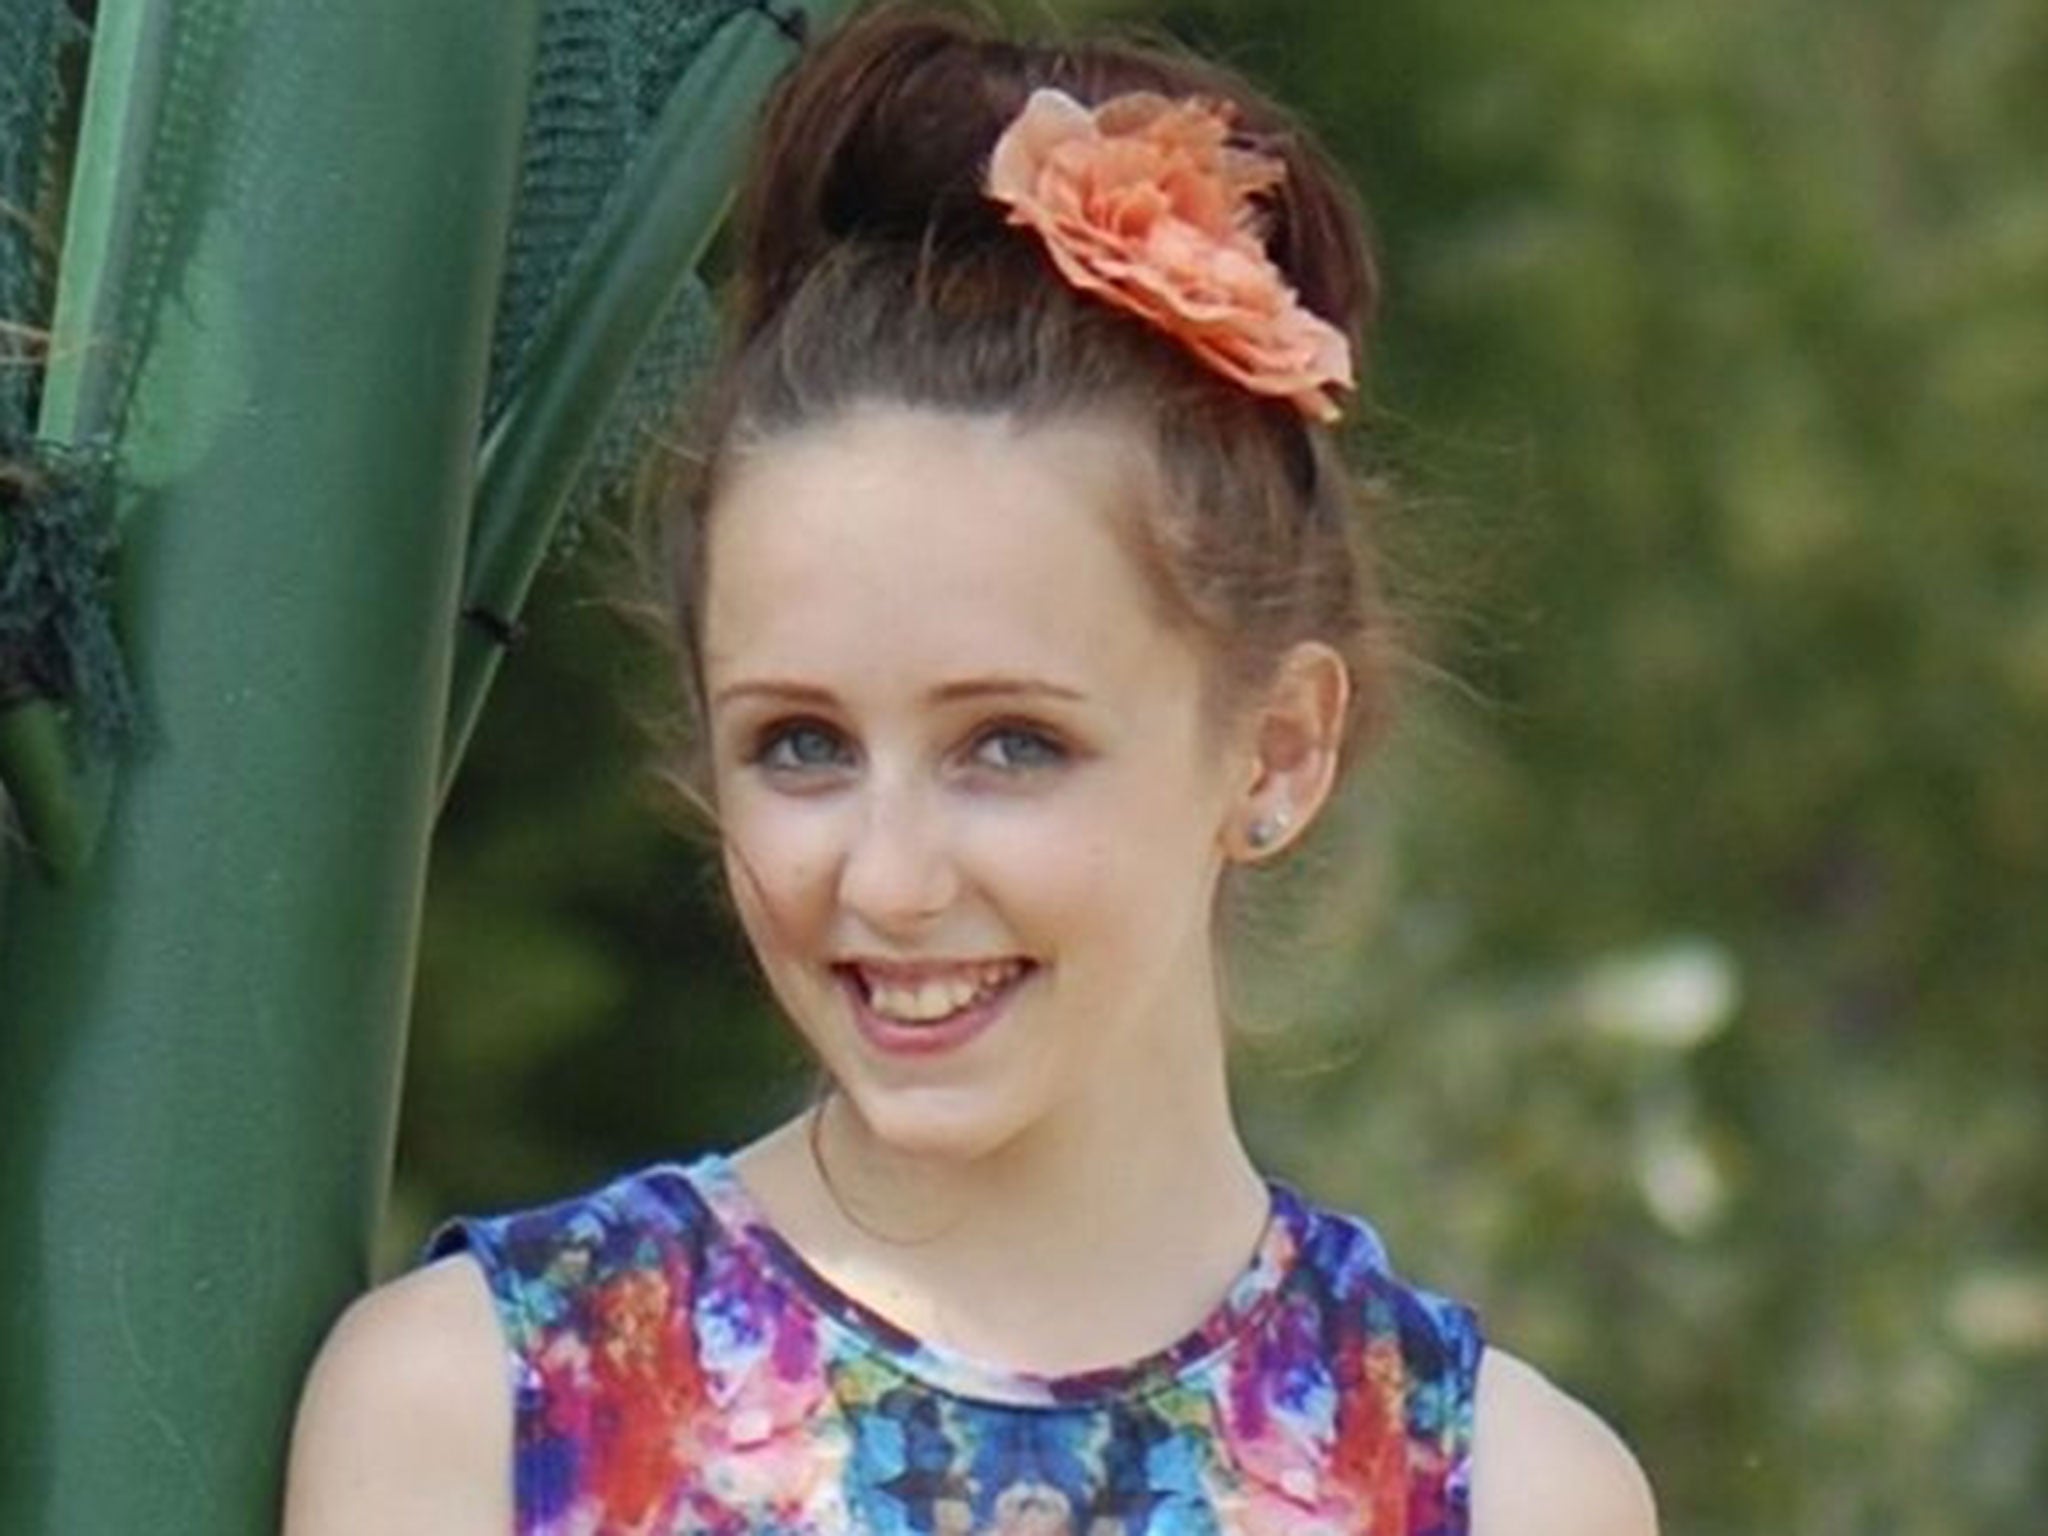 Alice Gross's body was found wrapped in a bag and weighted down, inquest hears